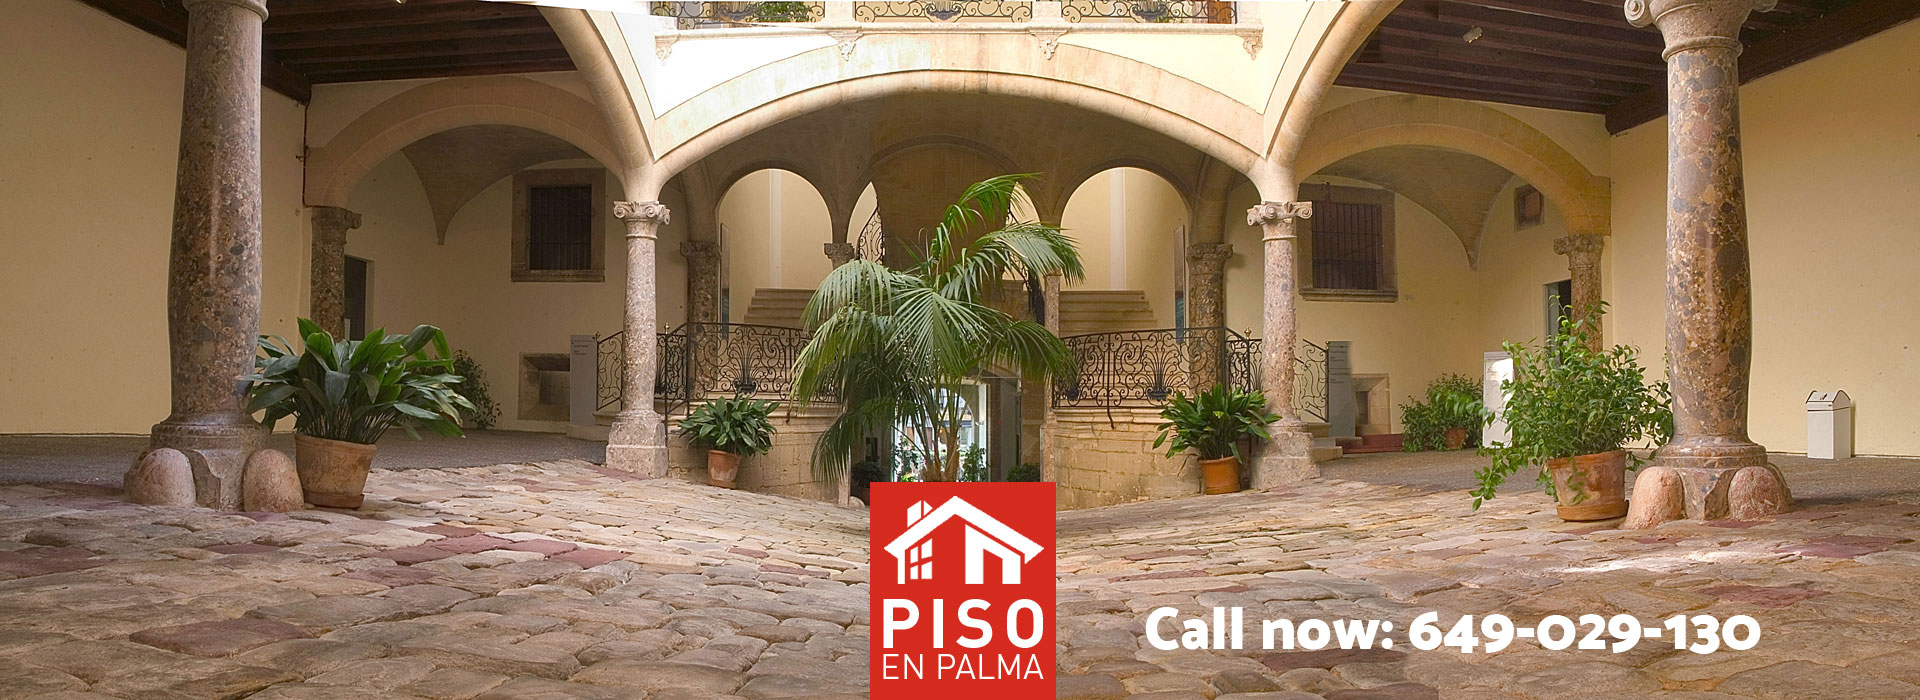 Flats for sale or to rent in Palma